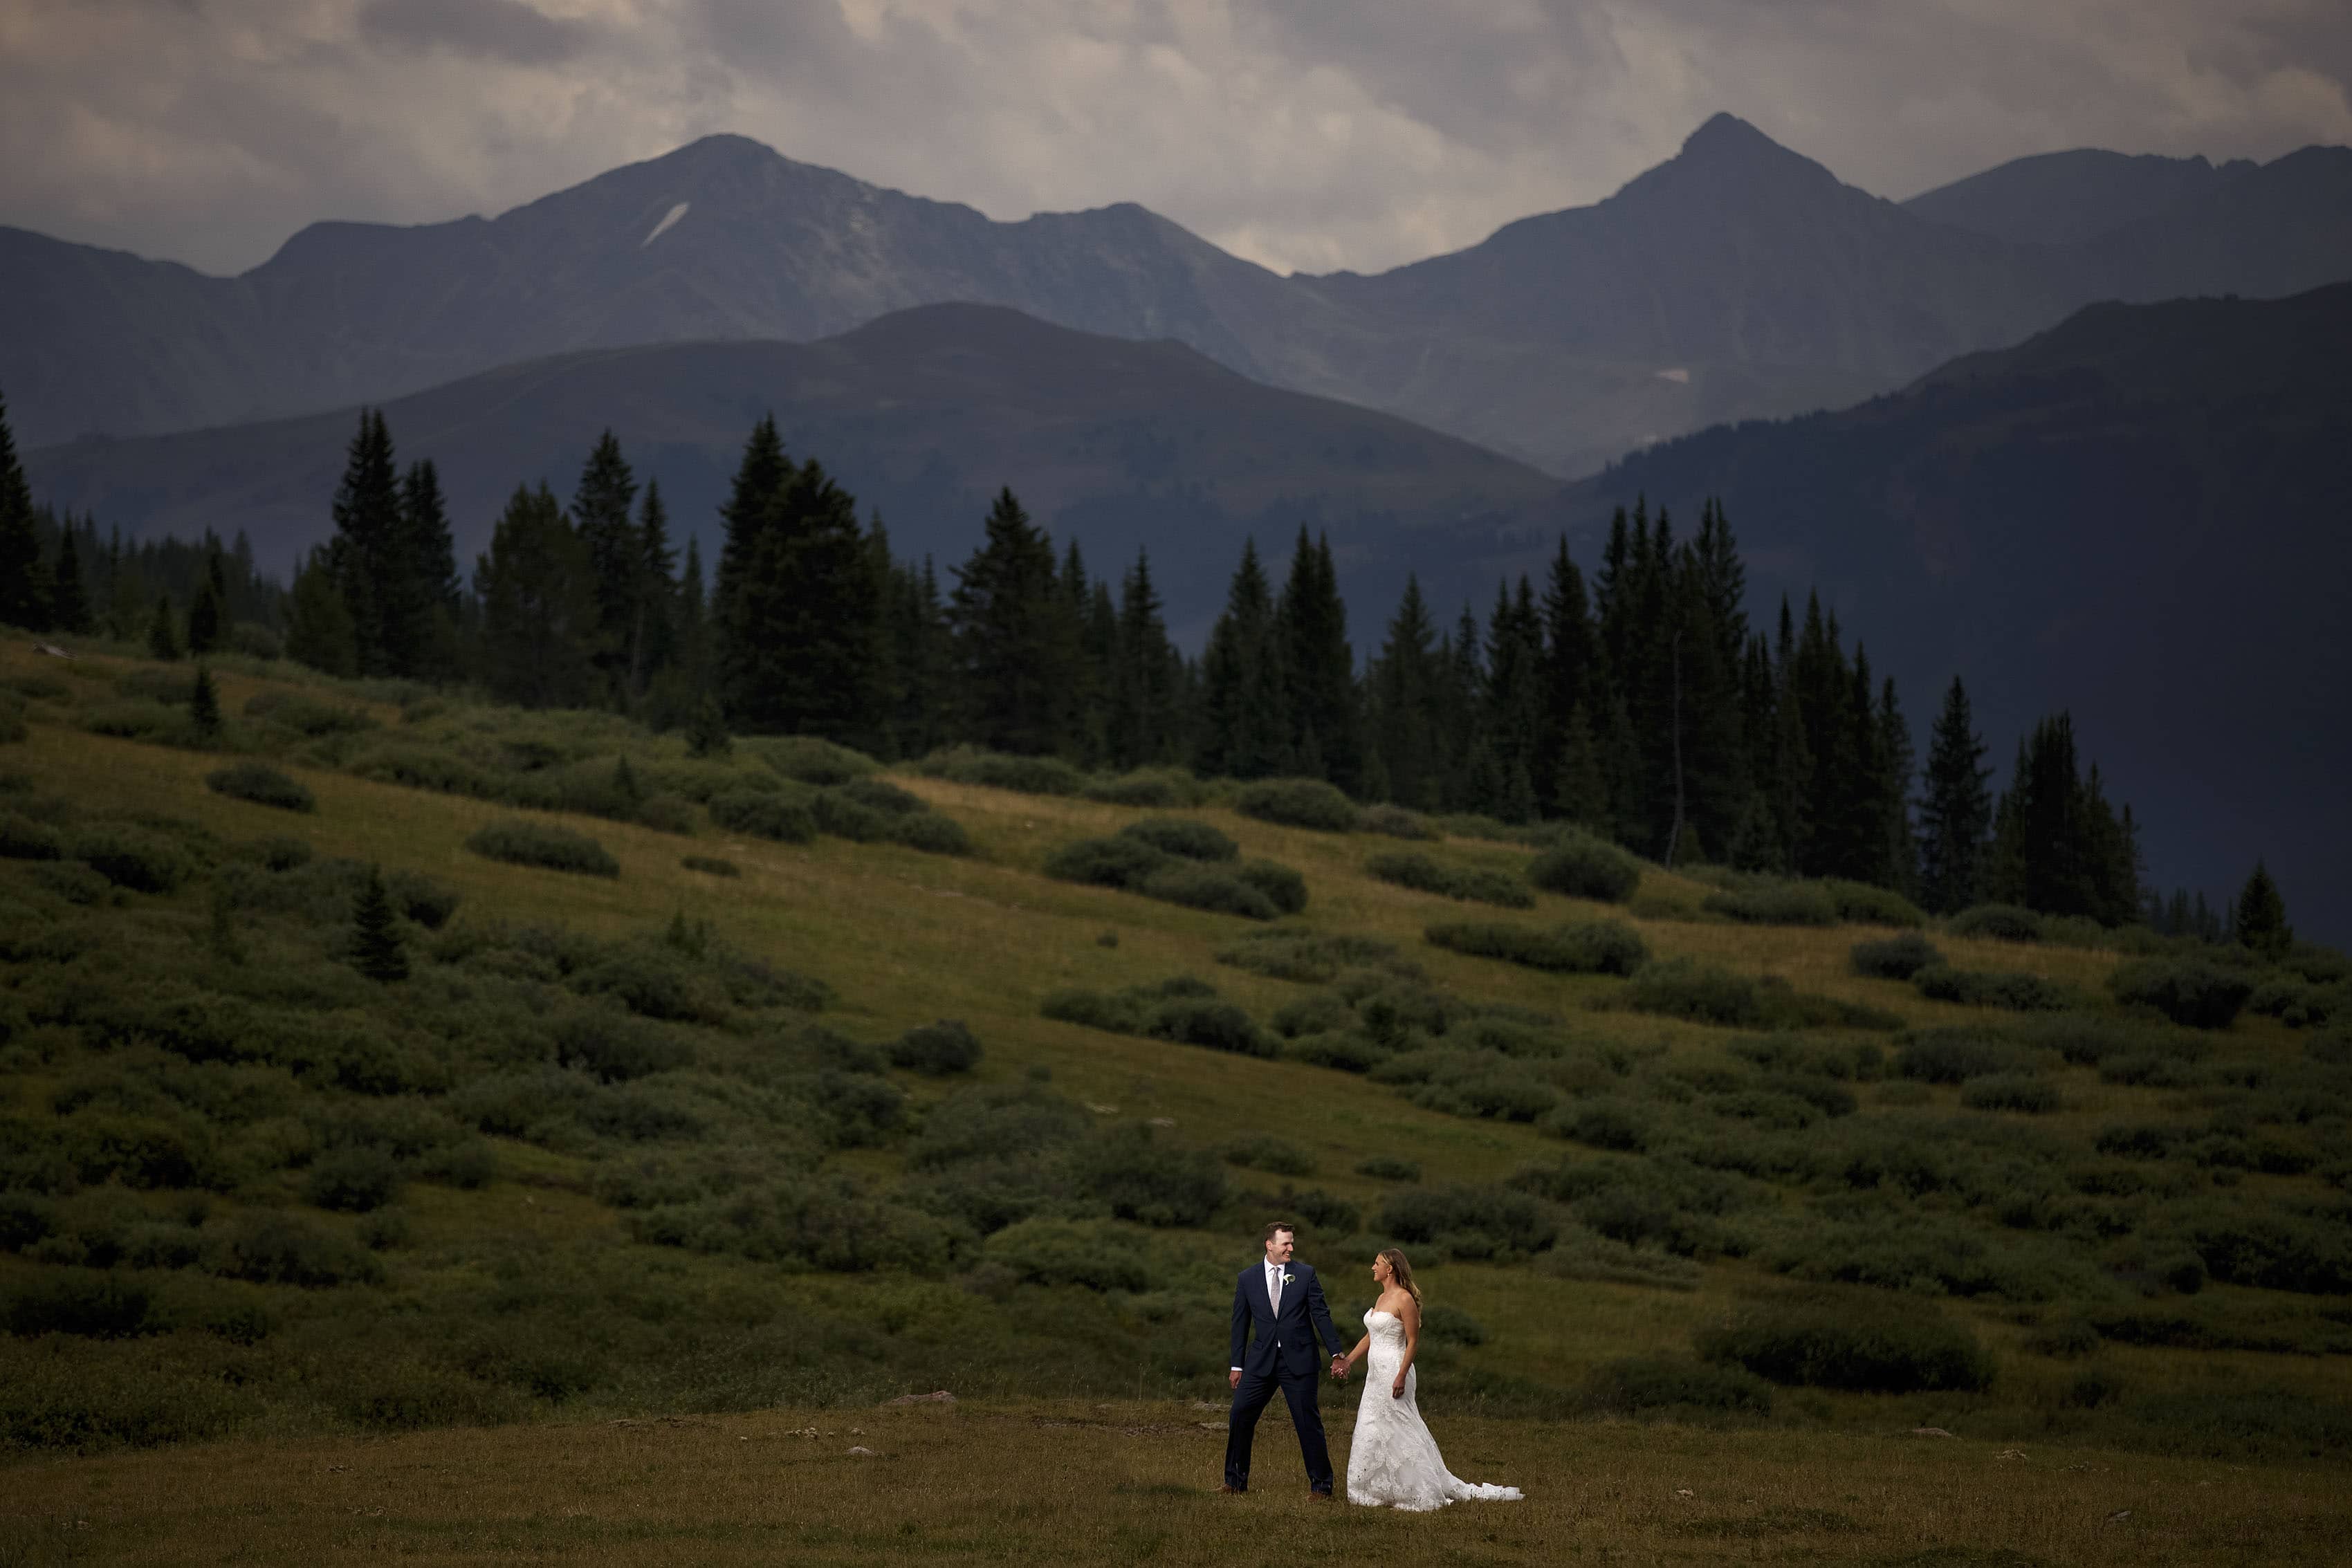 The bride and groom pose for a portrait on Shrine Pass with the Tenmile range in the background